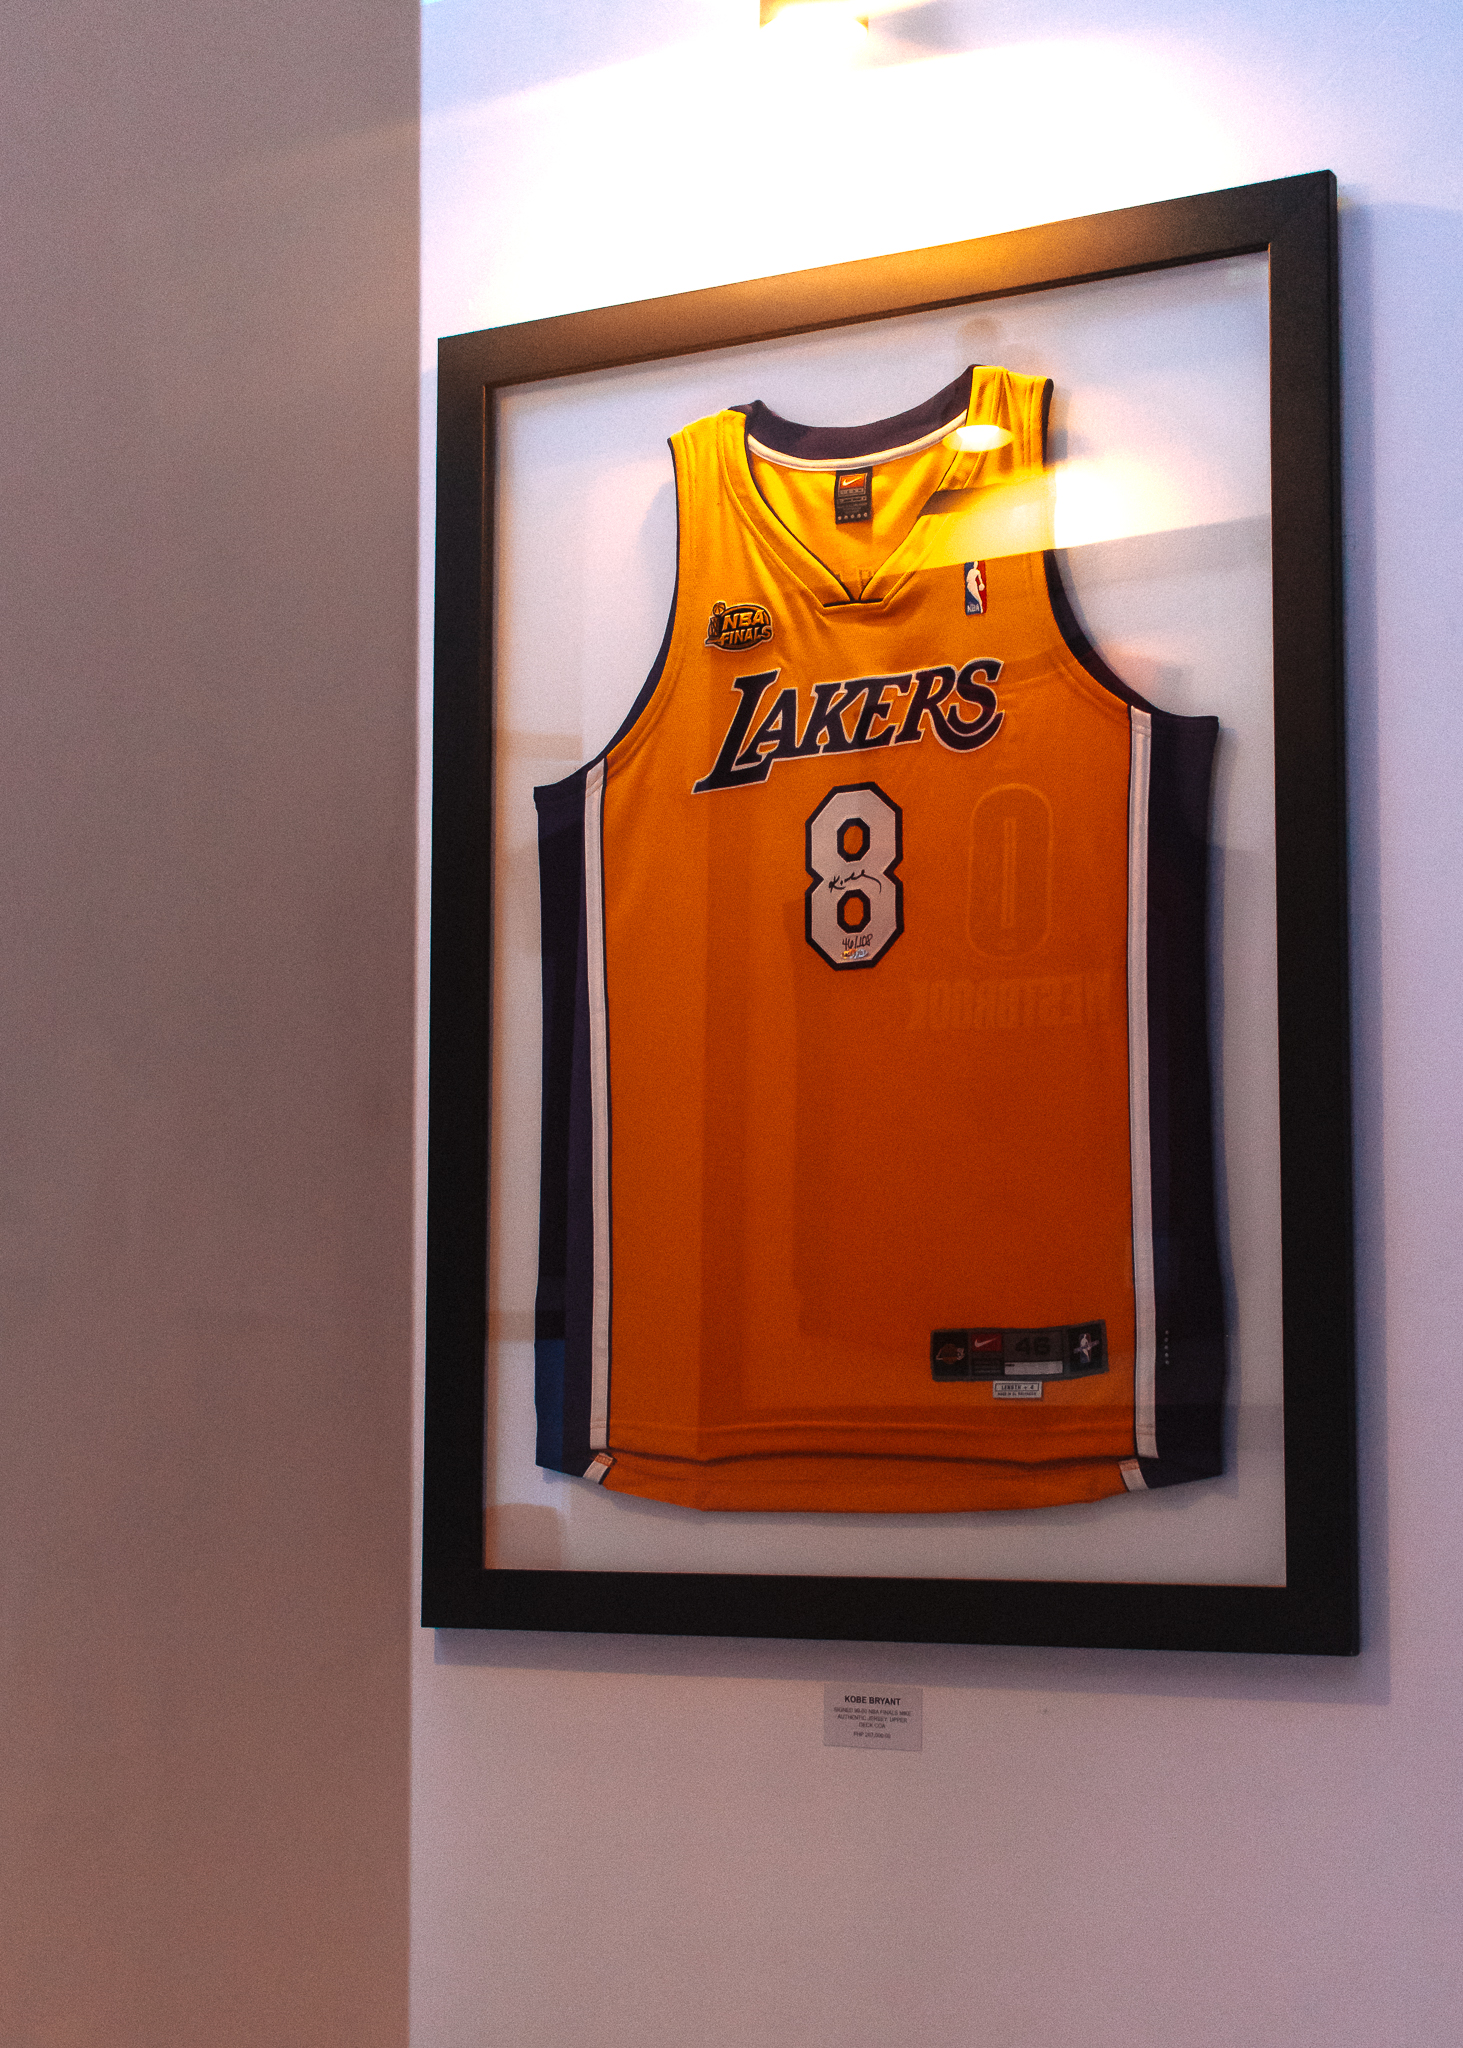 Kobe Bryant-signed jersey for P300,000, cop or drop?